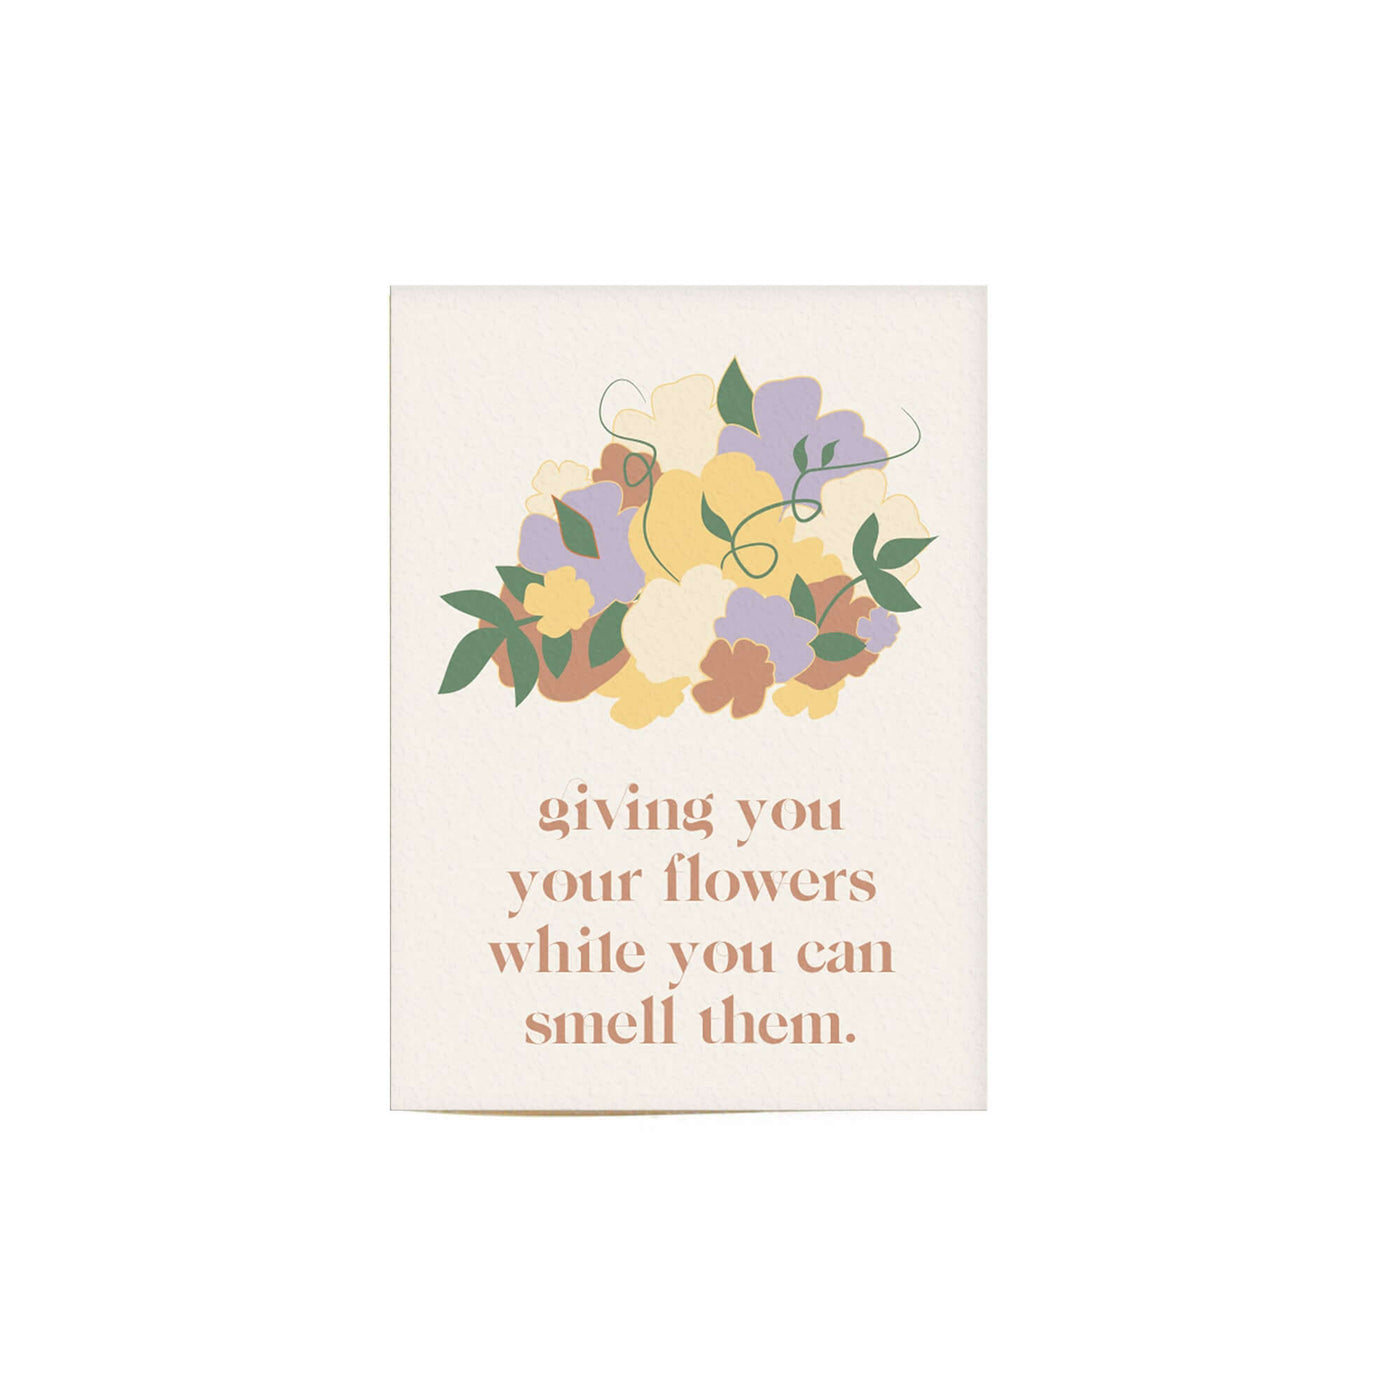 cream colored card that reads "giving you flowers while you can smell them" with an illustration of a flower bouquet